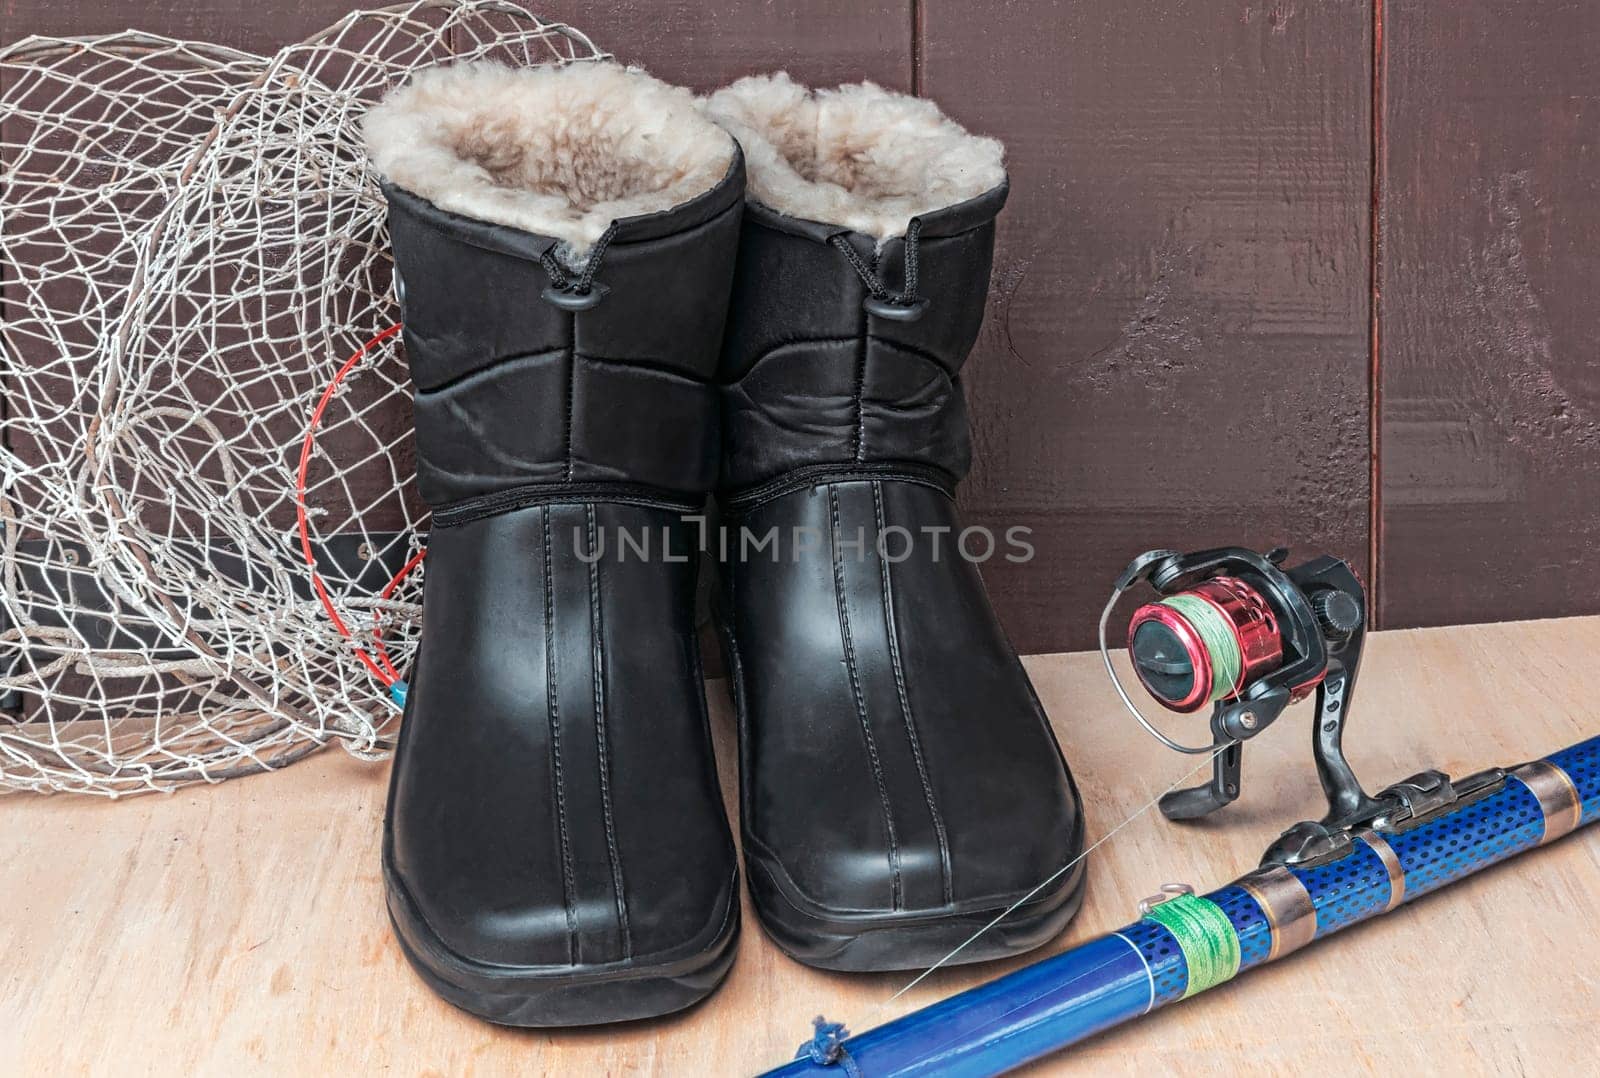 Shoes and items for fishing. by georgina198